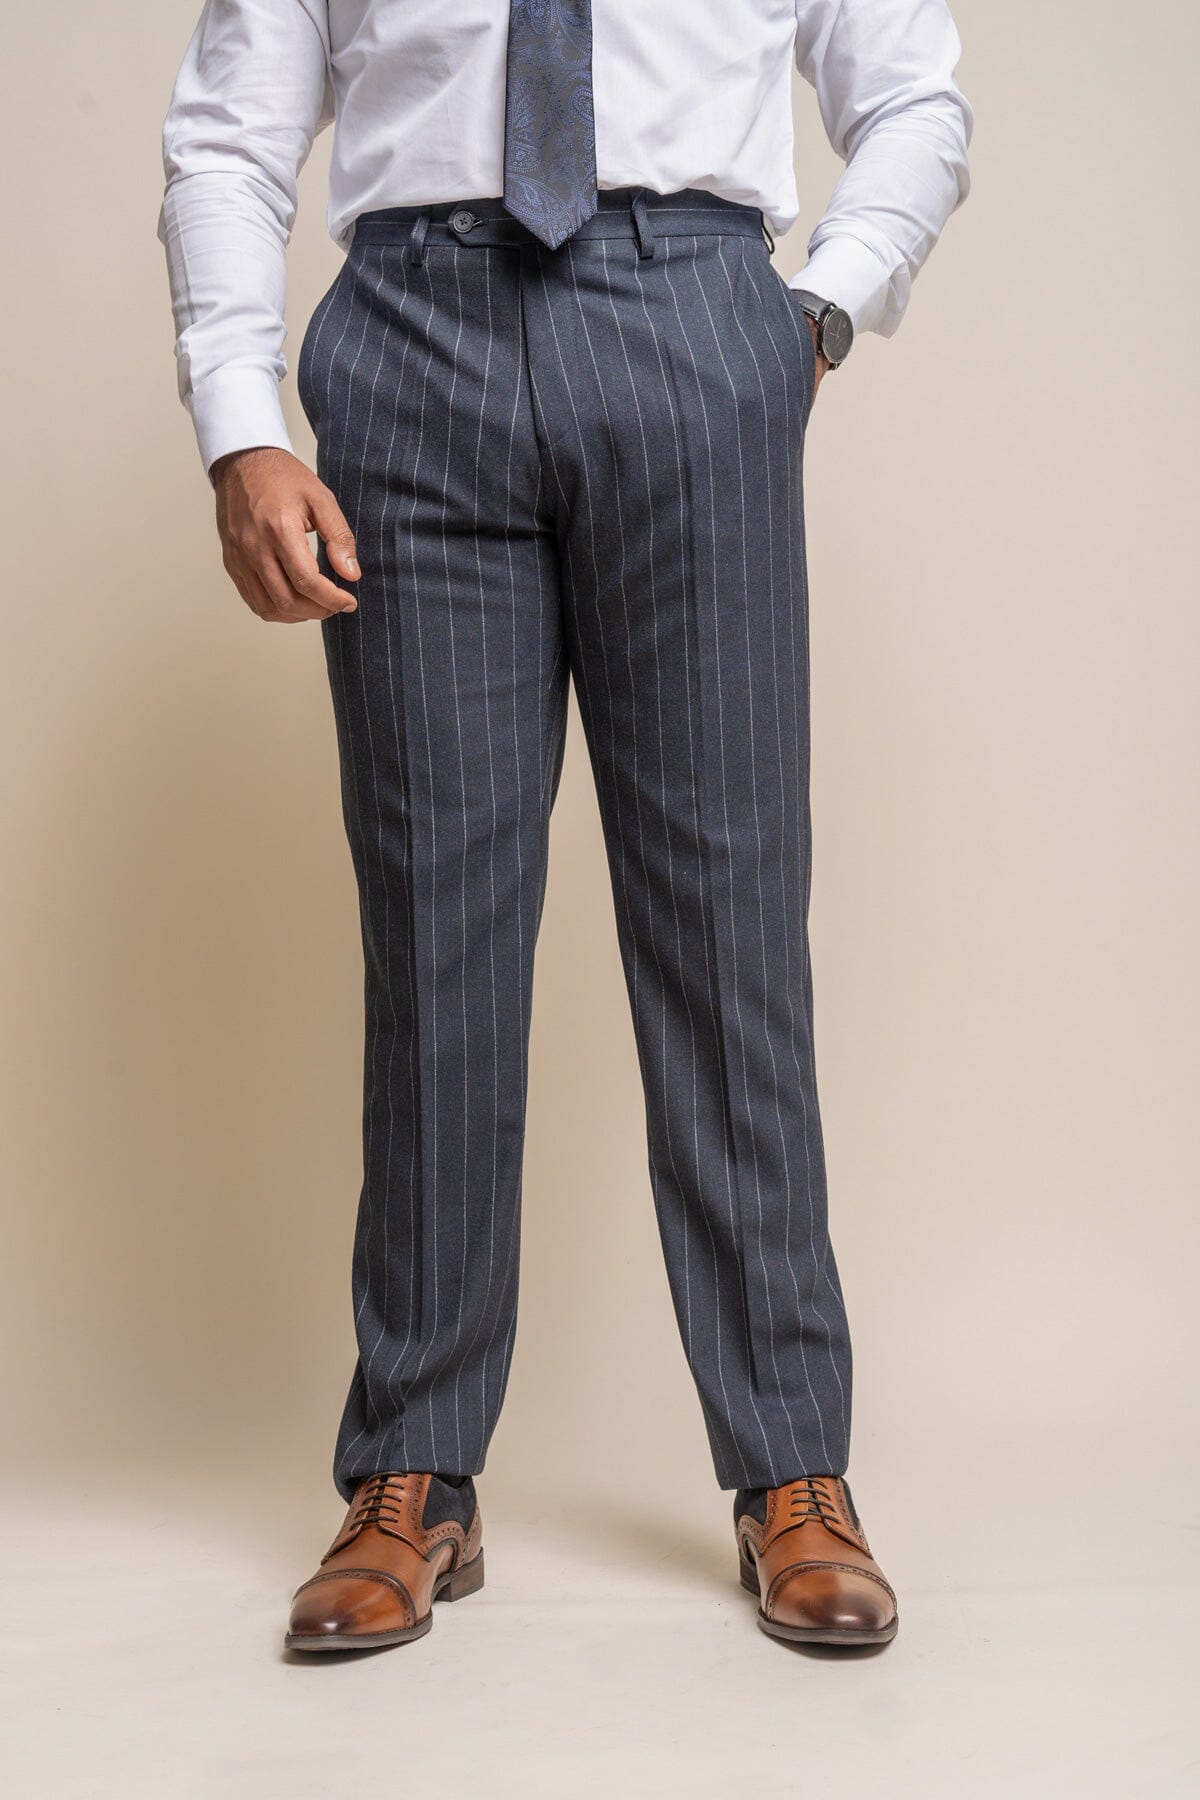 Mens Pinstripe Trousers Black and Grey Stripe Morning Royal Ascot Ex Hire  (as8, Waist_Inseam, Numeric_28, Numeric_26) : Amazon.co.uk: Fashion